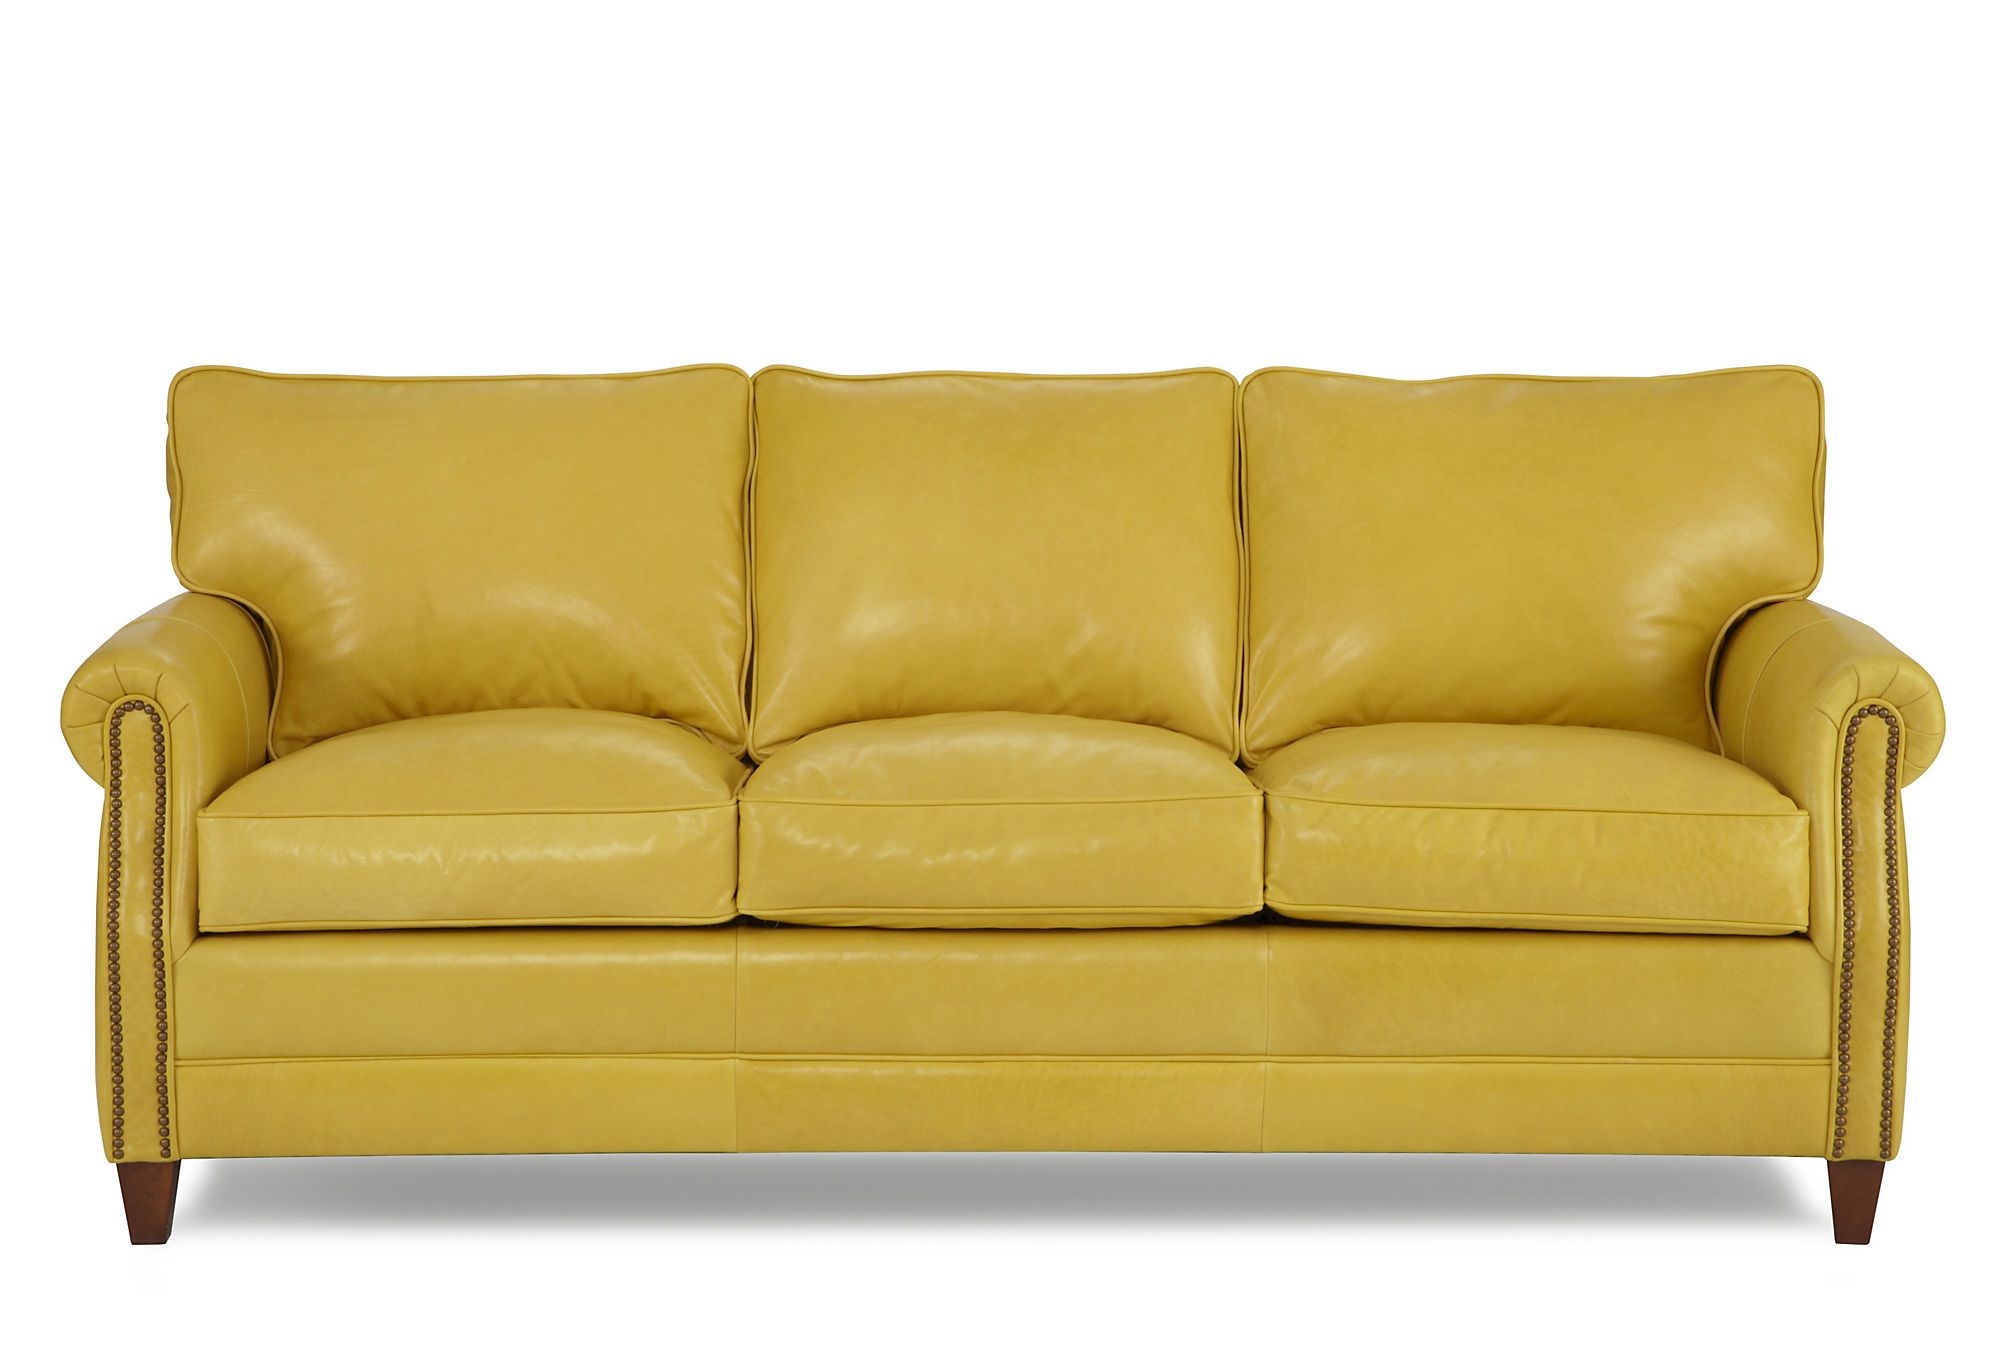 leather sofa color is turning yellow